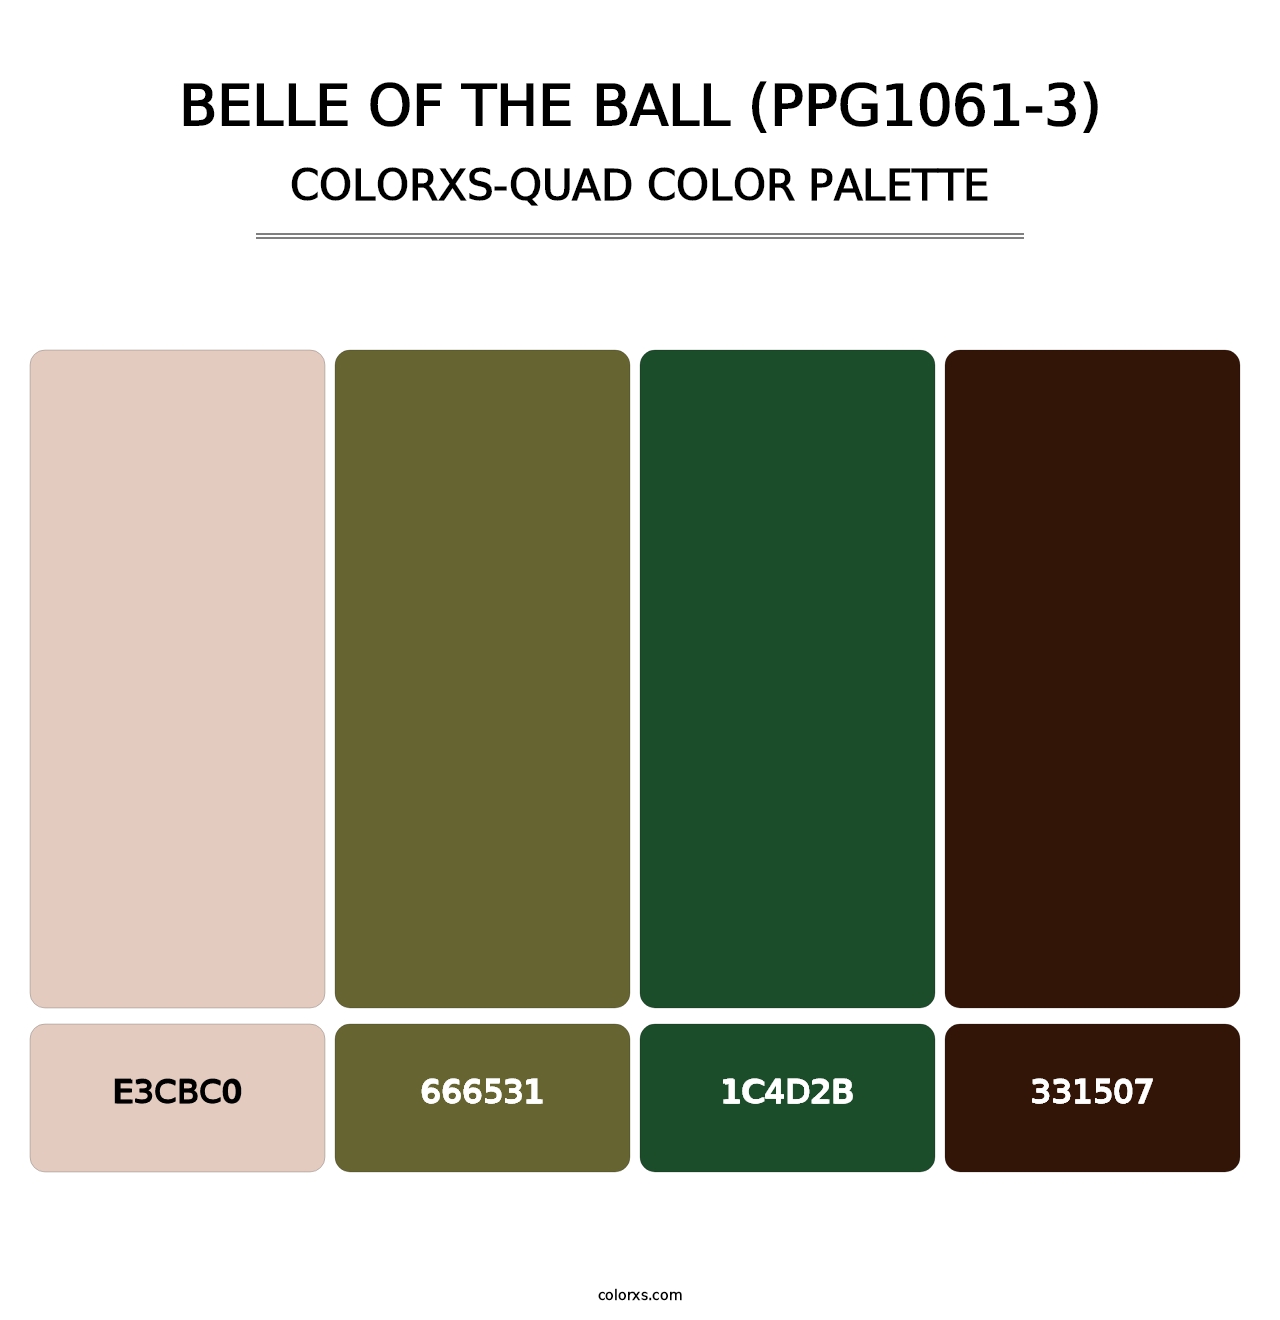 Belle Of The Ball (PPG1061-3) - Colorxs Quad Palette